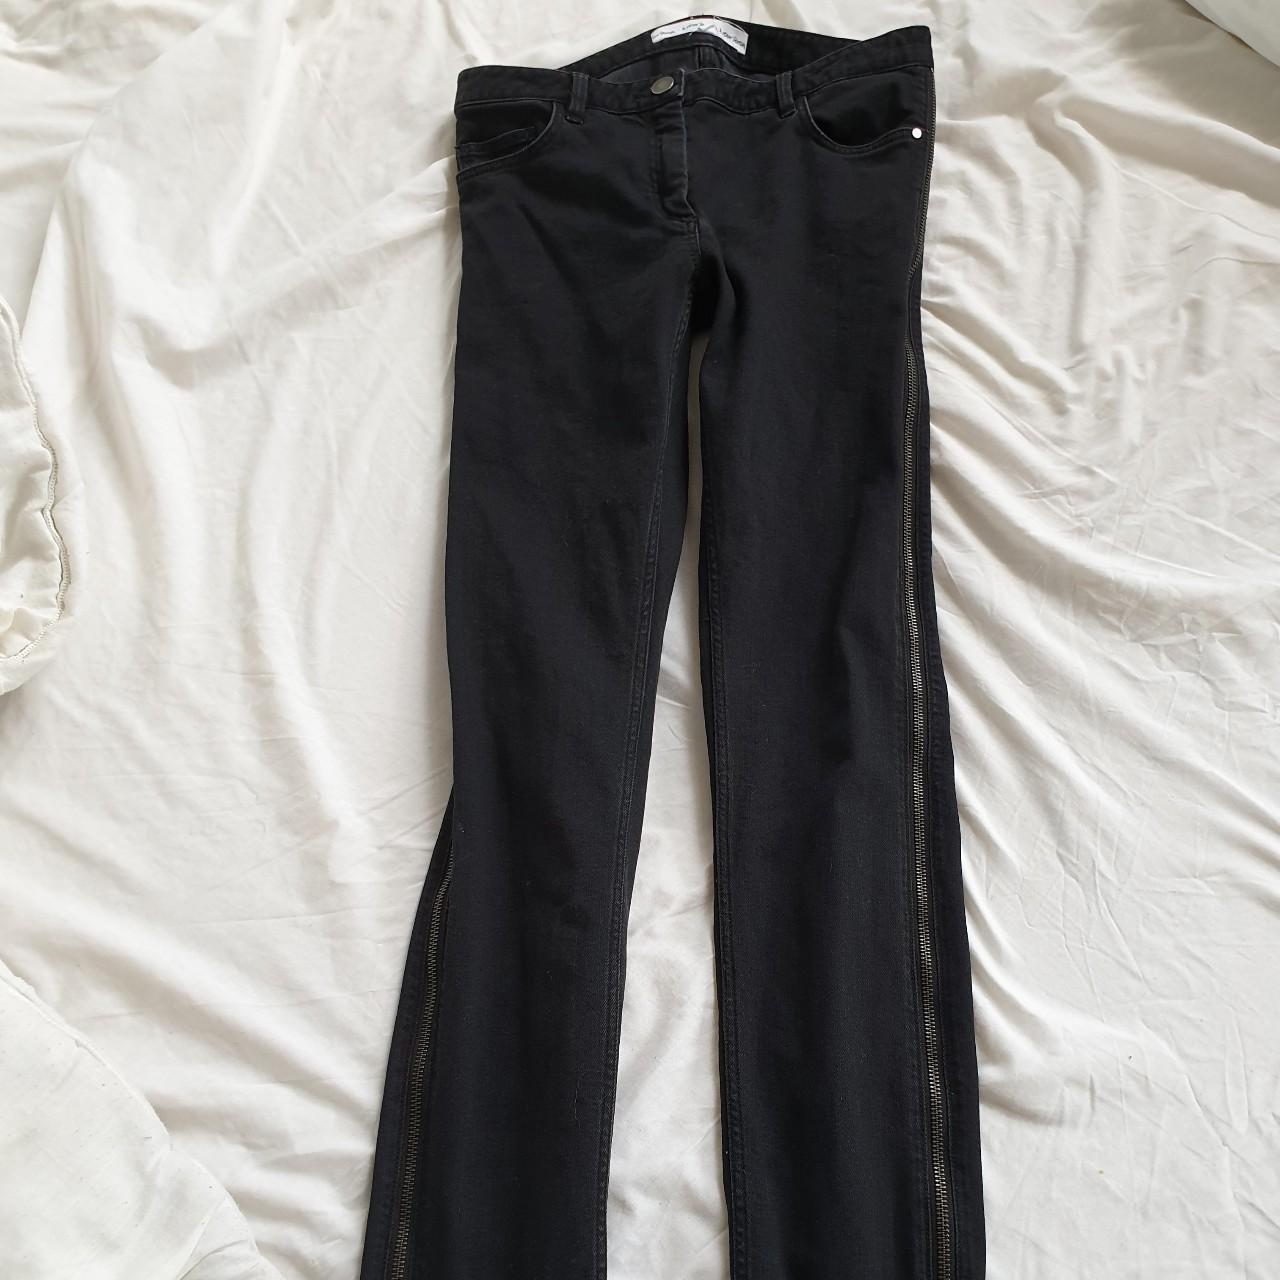 & Other Stories Black jeans with side zips that open... - Depop